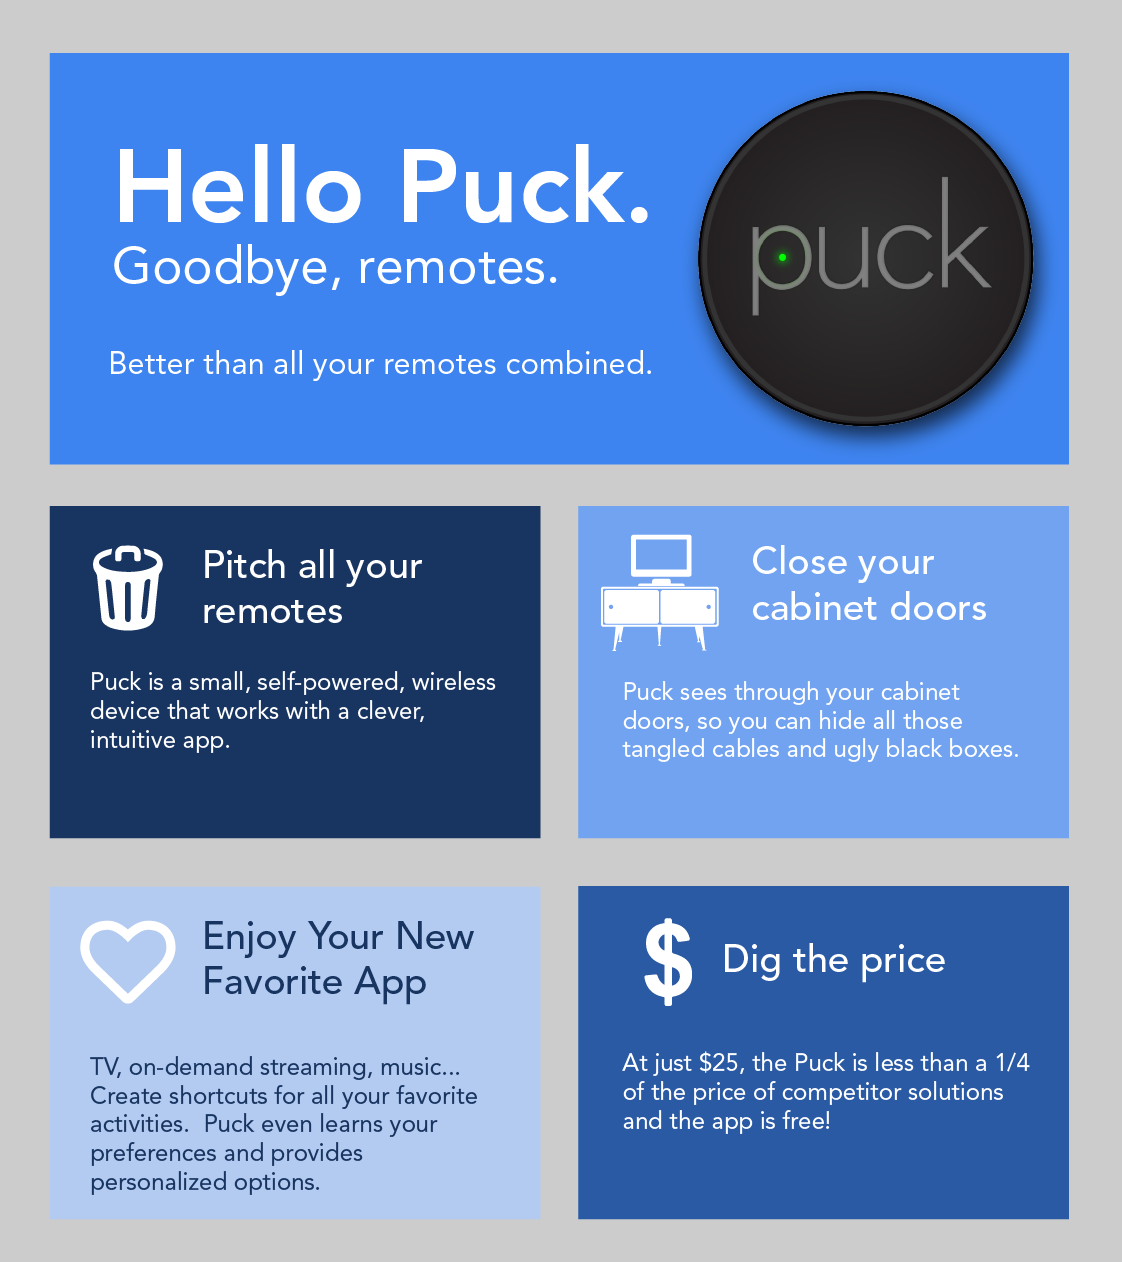 Puck eliminates the need for traditional remotes